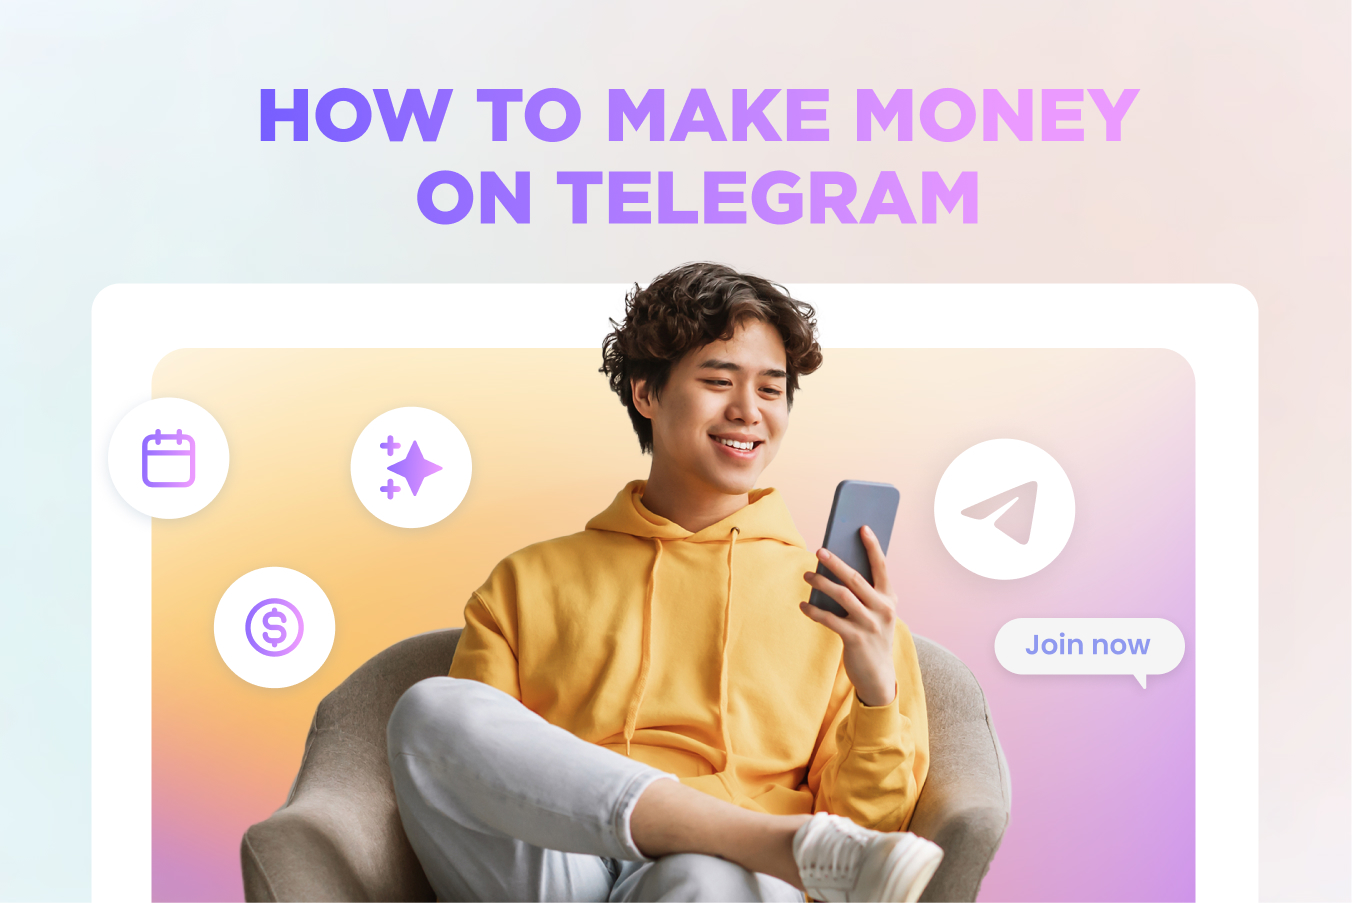 creator holding a smartphone with telegram logo in the background